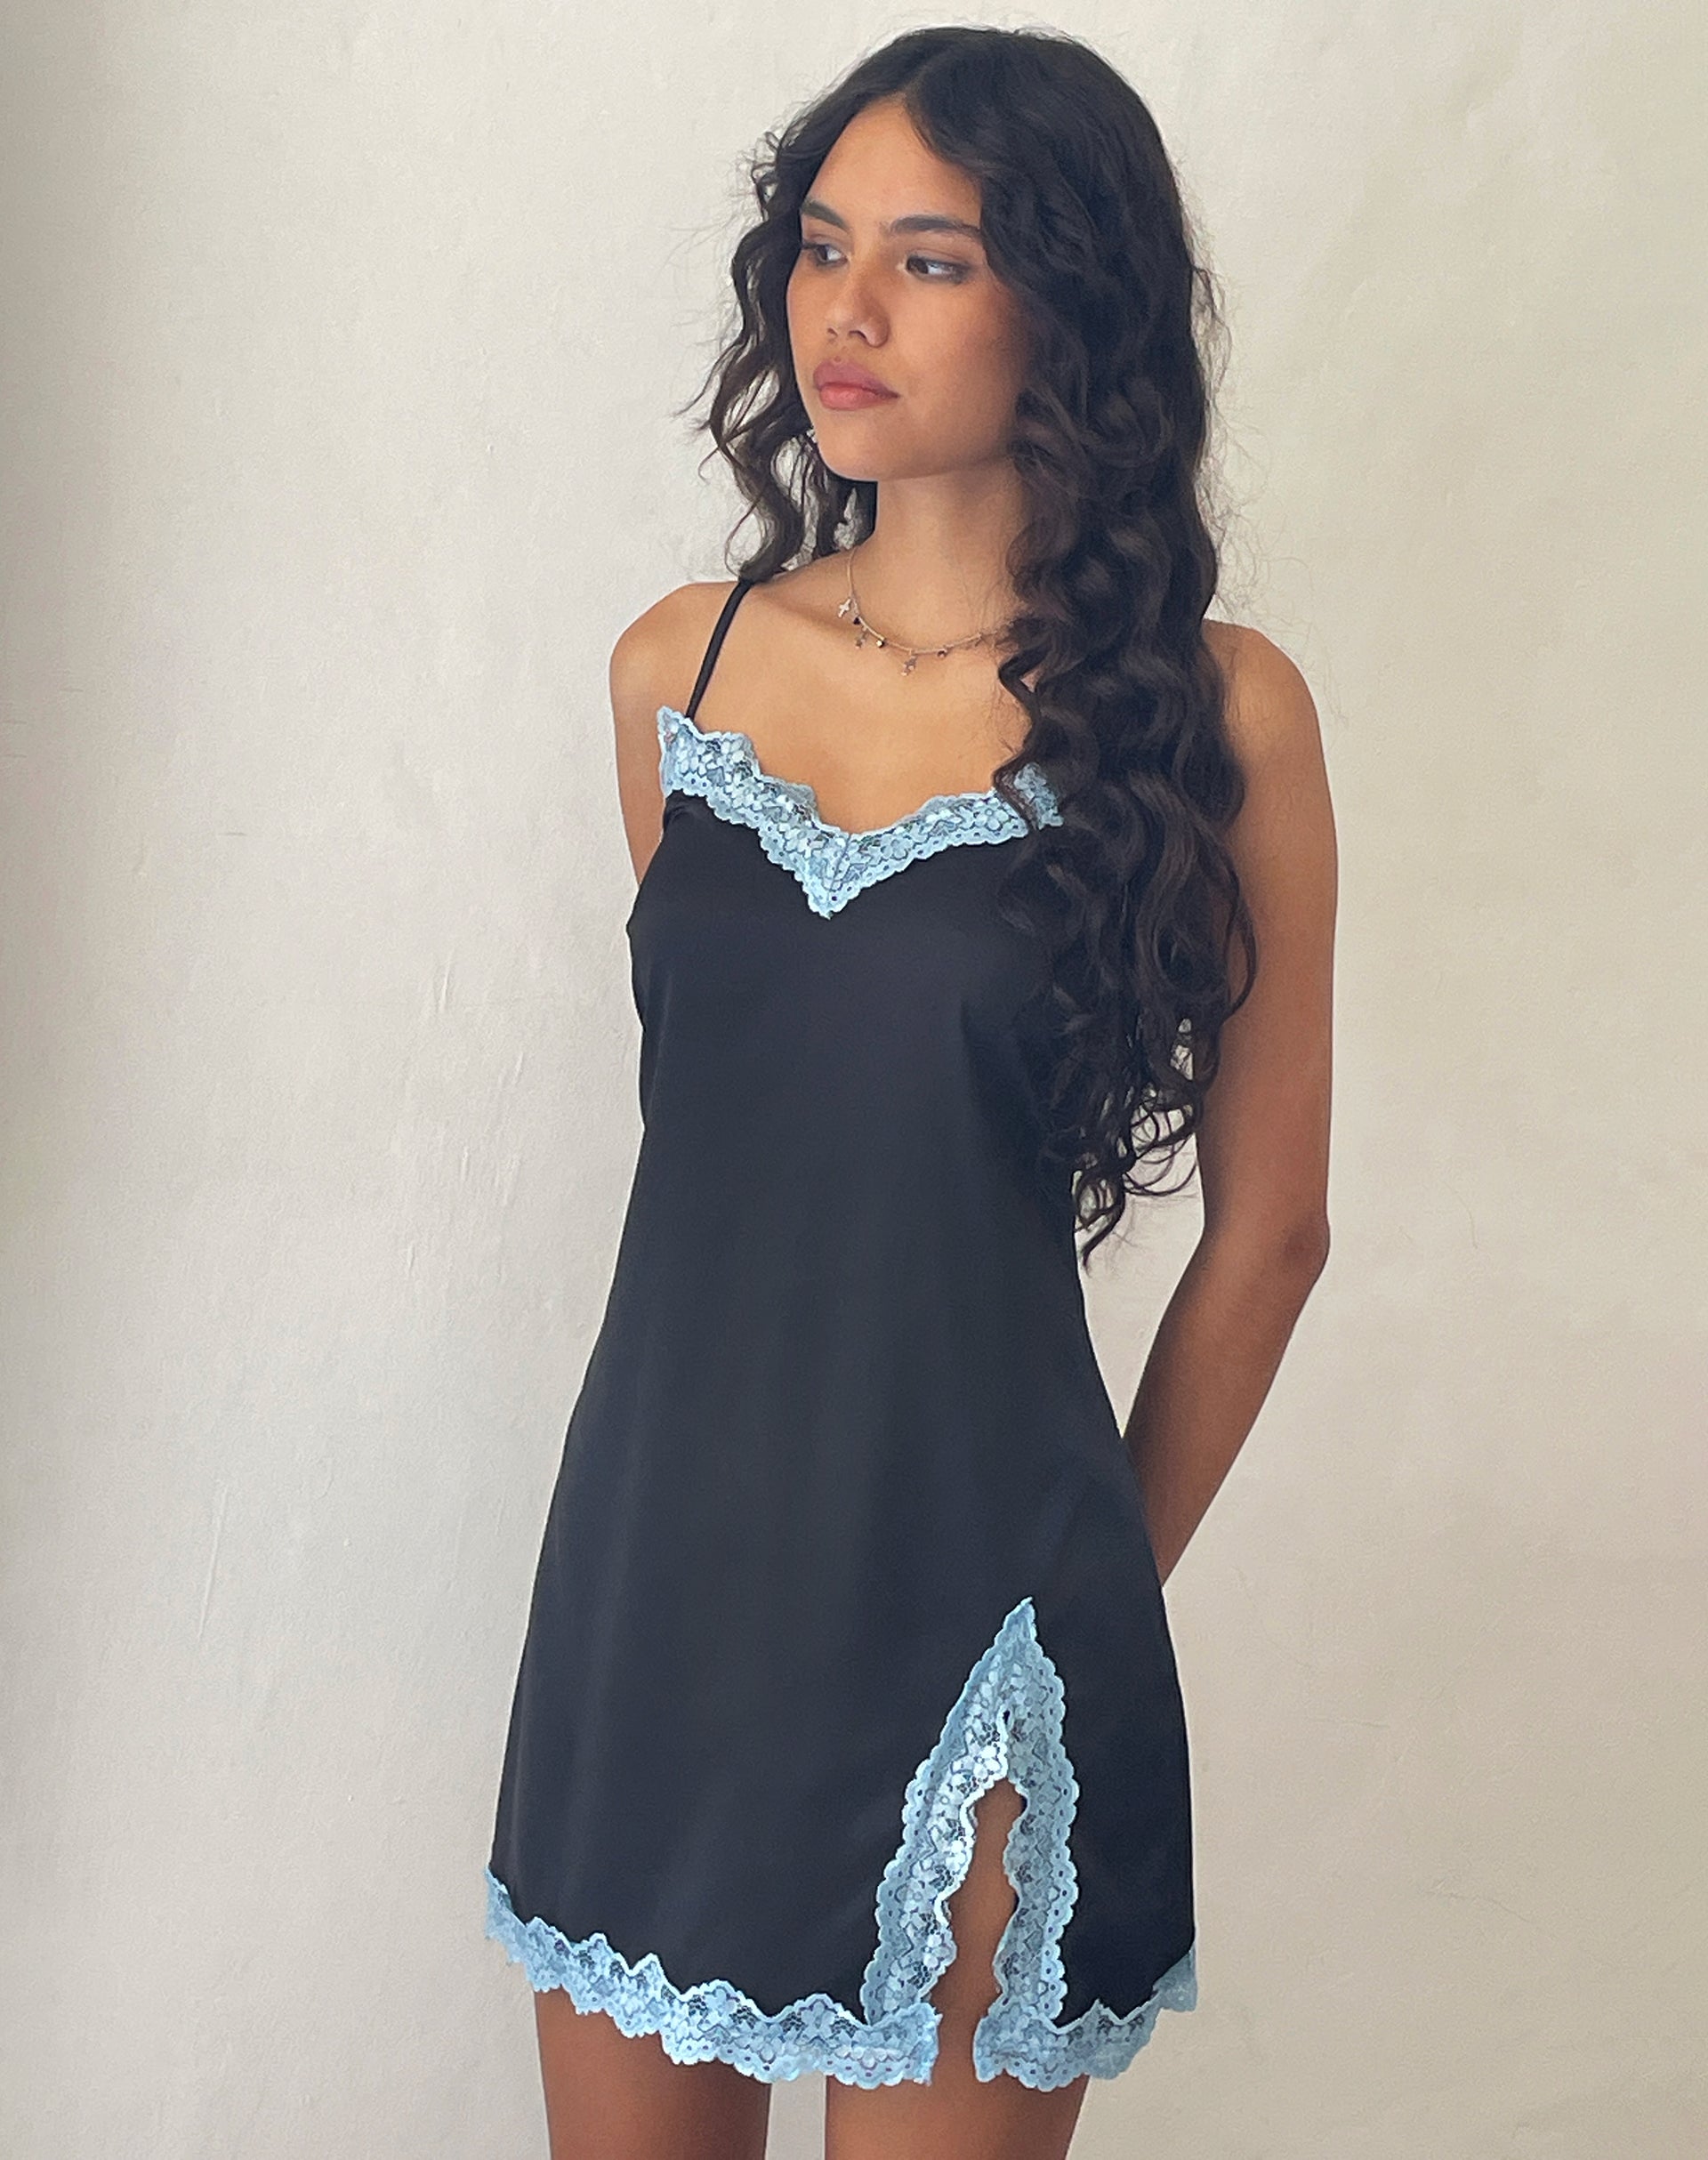 image of Oming Slip Mini Dress in Black with Blue Lace